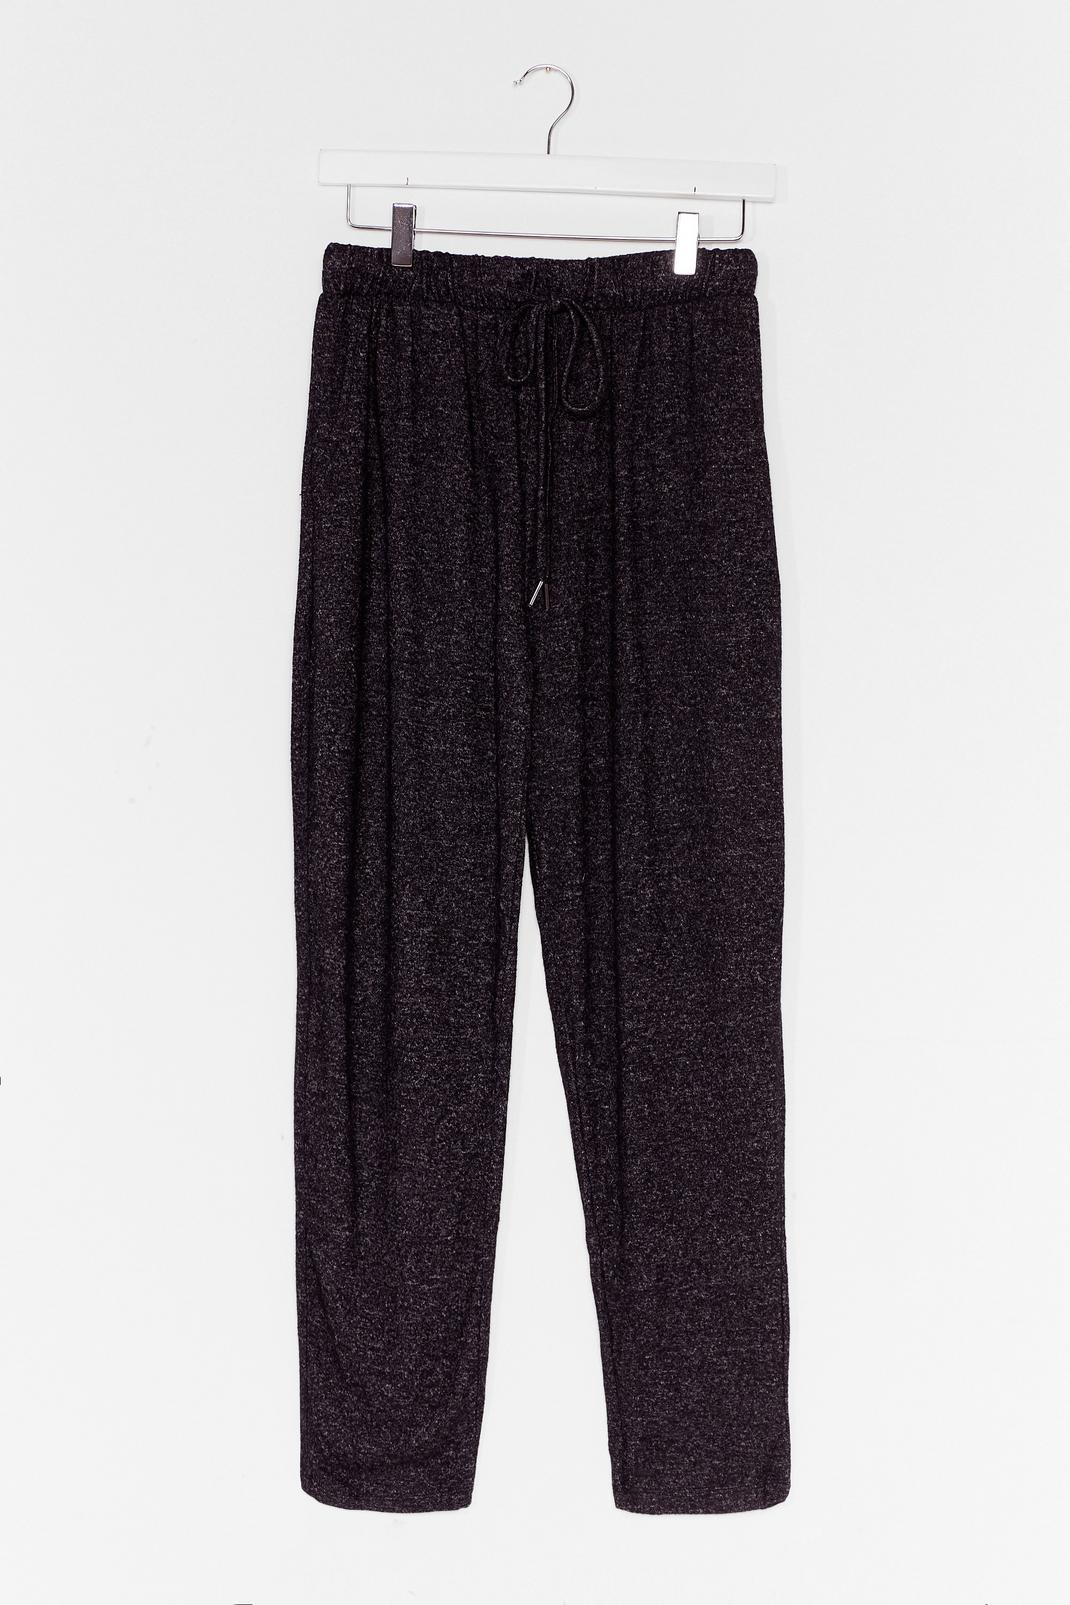 Navy Marl Slouchy Loungewear Joggers image number 1